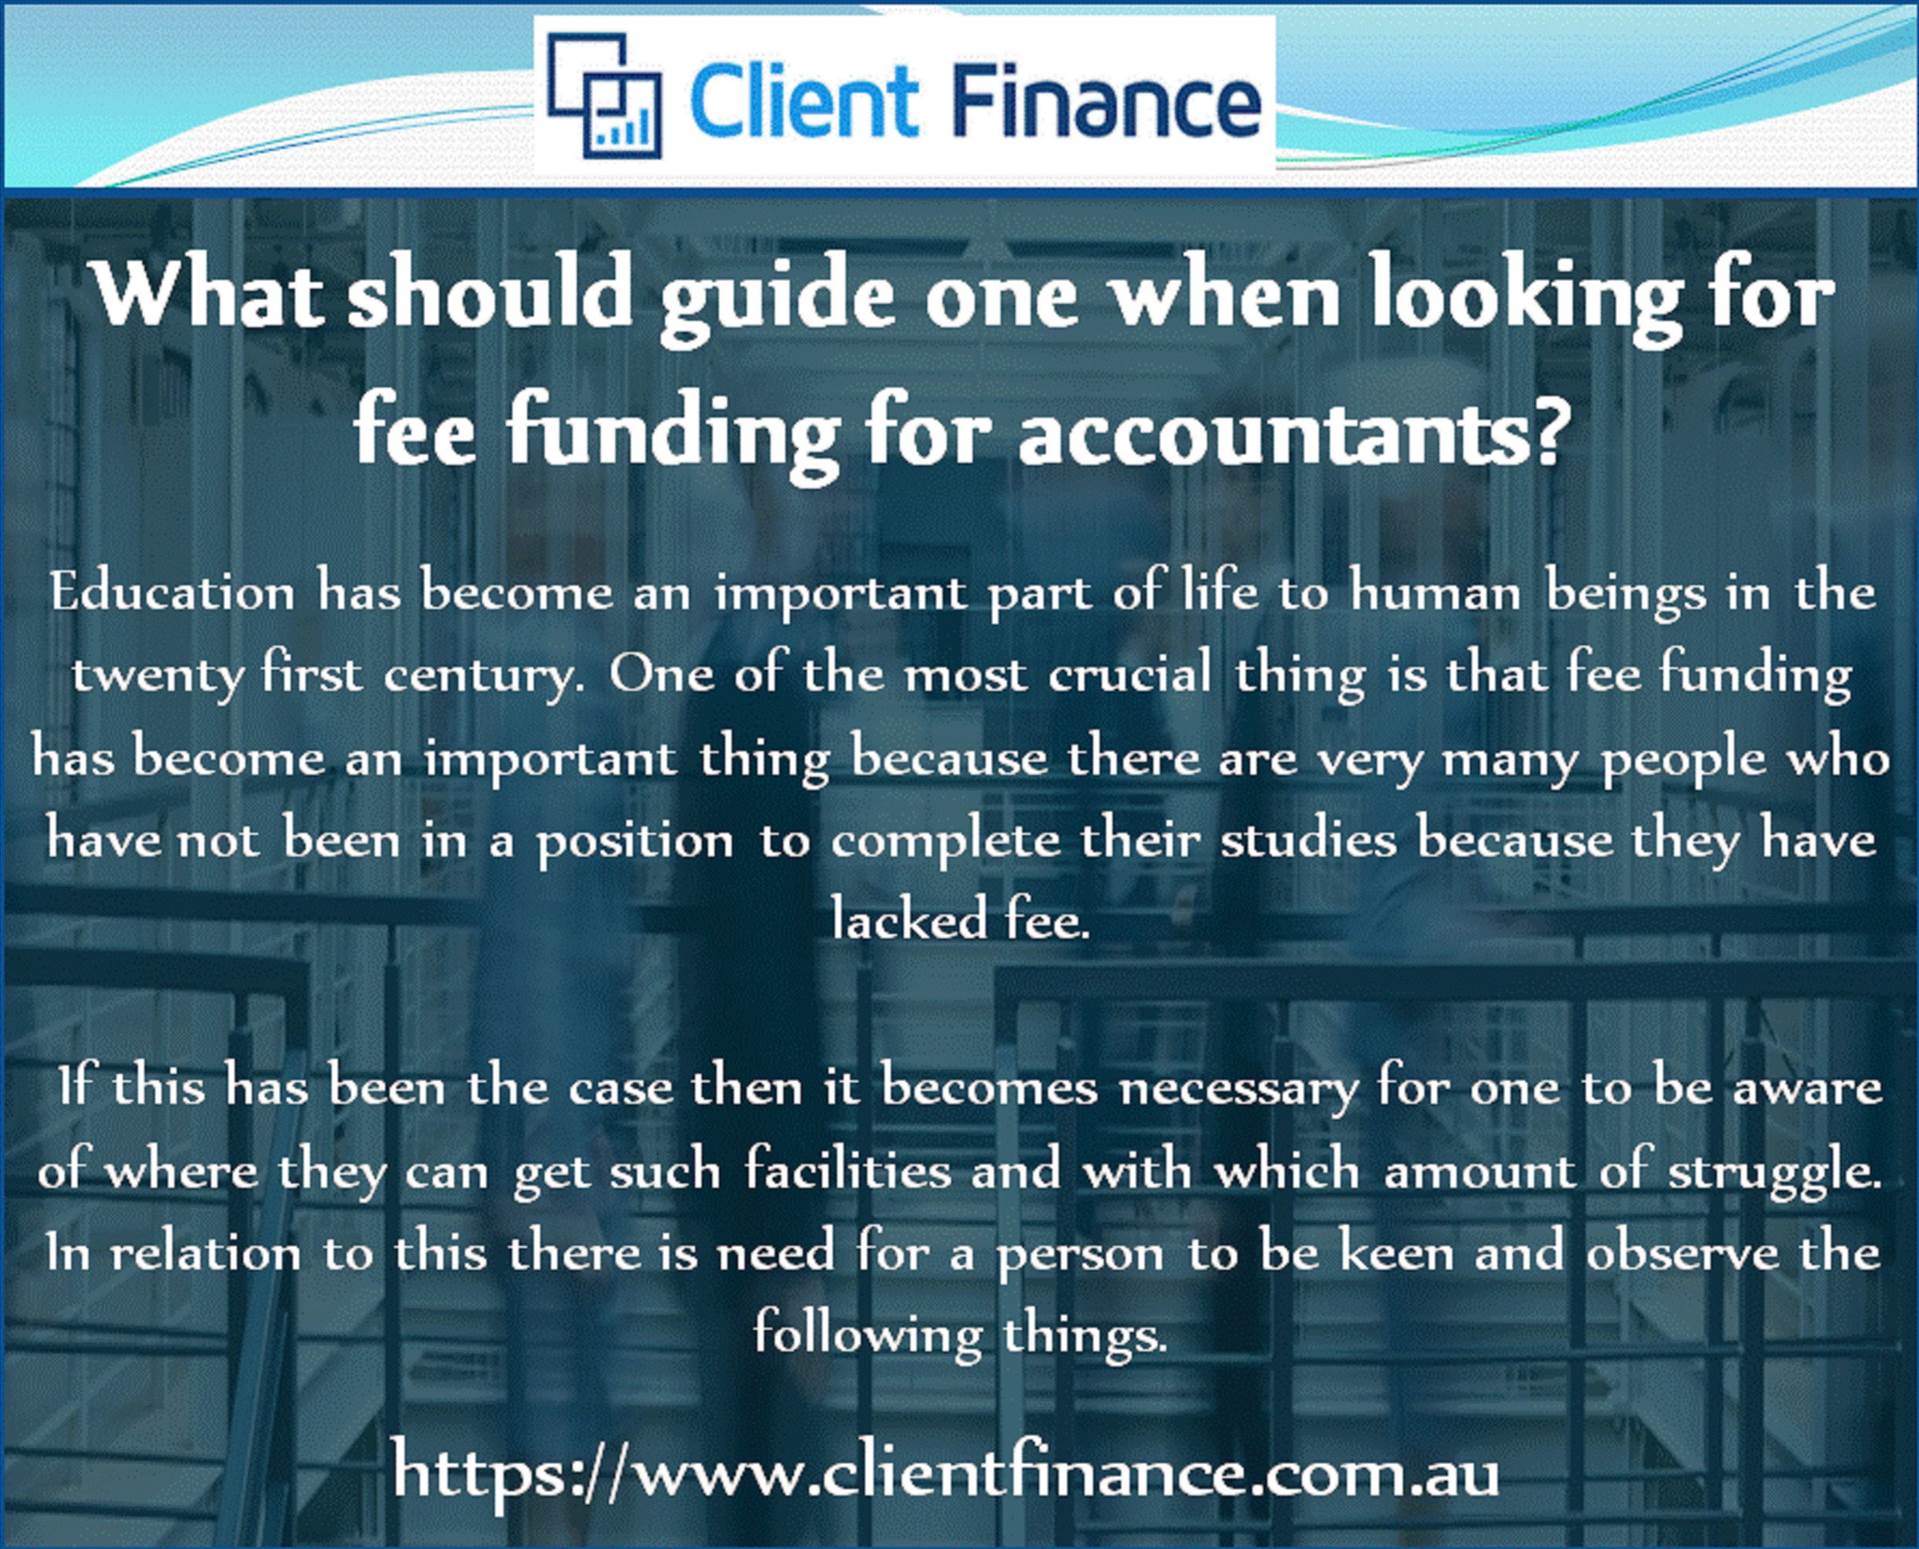 Accounting Fee Funding.jpg  by Clientfinance